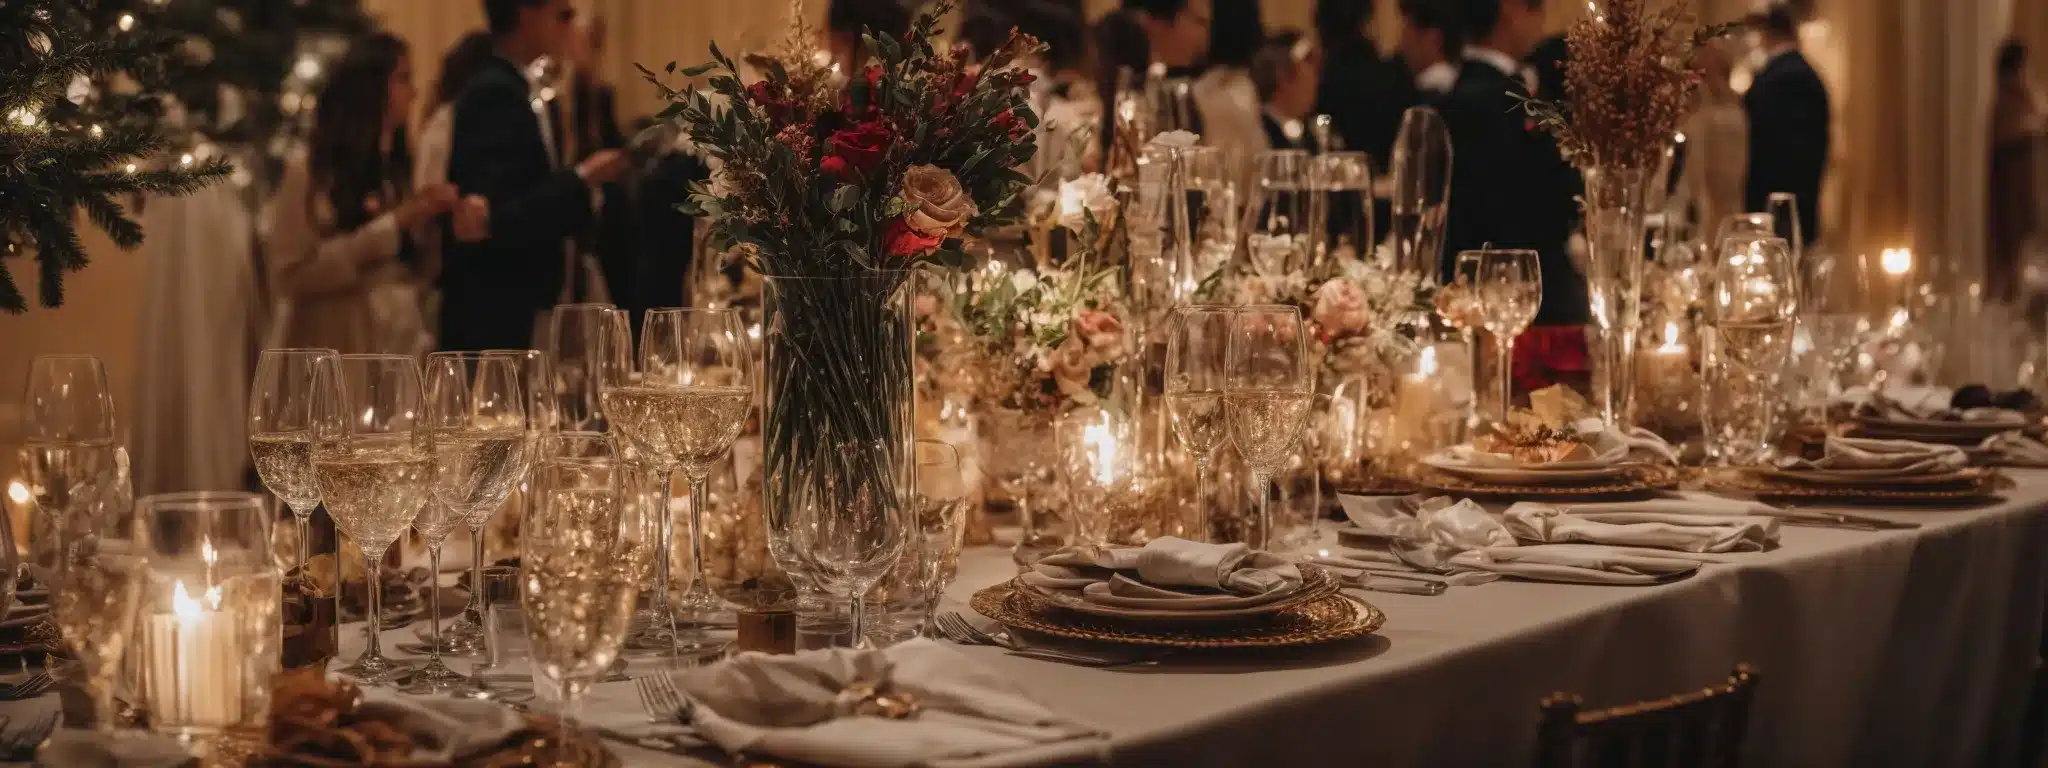 A Festive Gala With A Table Of Personalized Gifts Ready For Excited Guests To Discover.